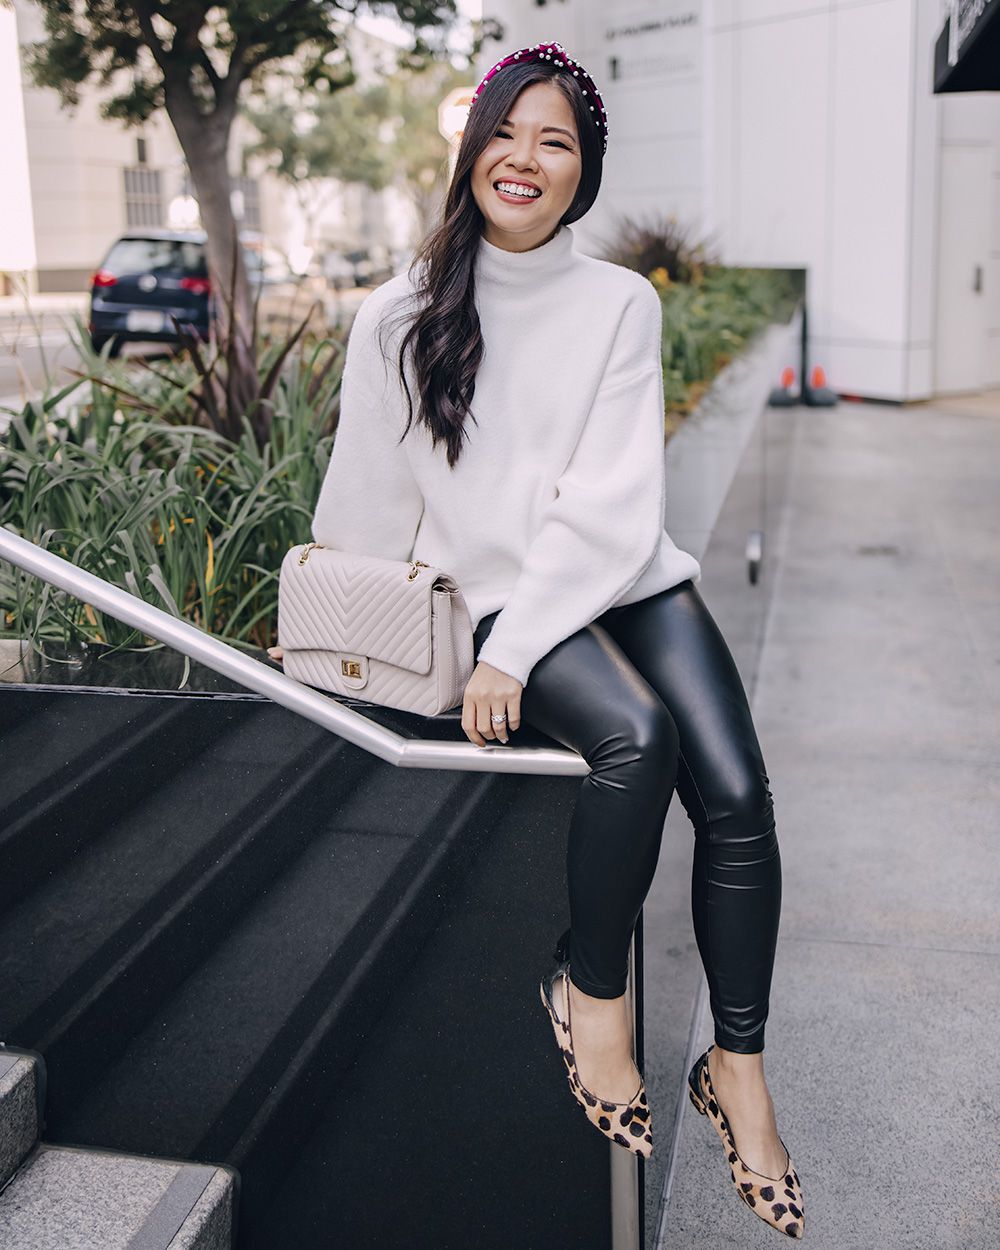 Faux Leather Leggings to Spice Up Any Outfit – Skirt The Rules